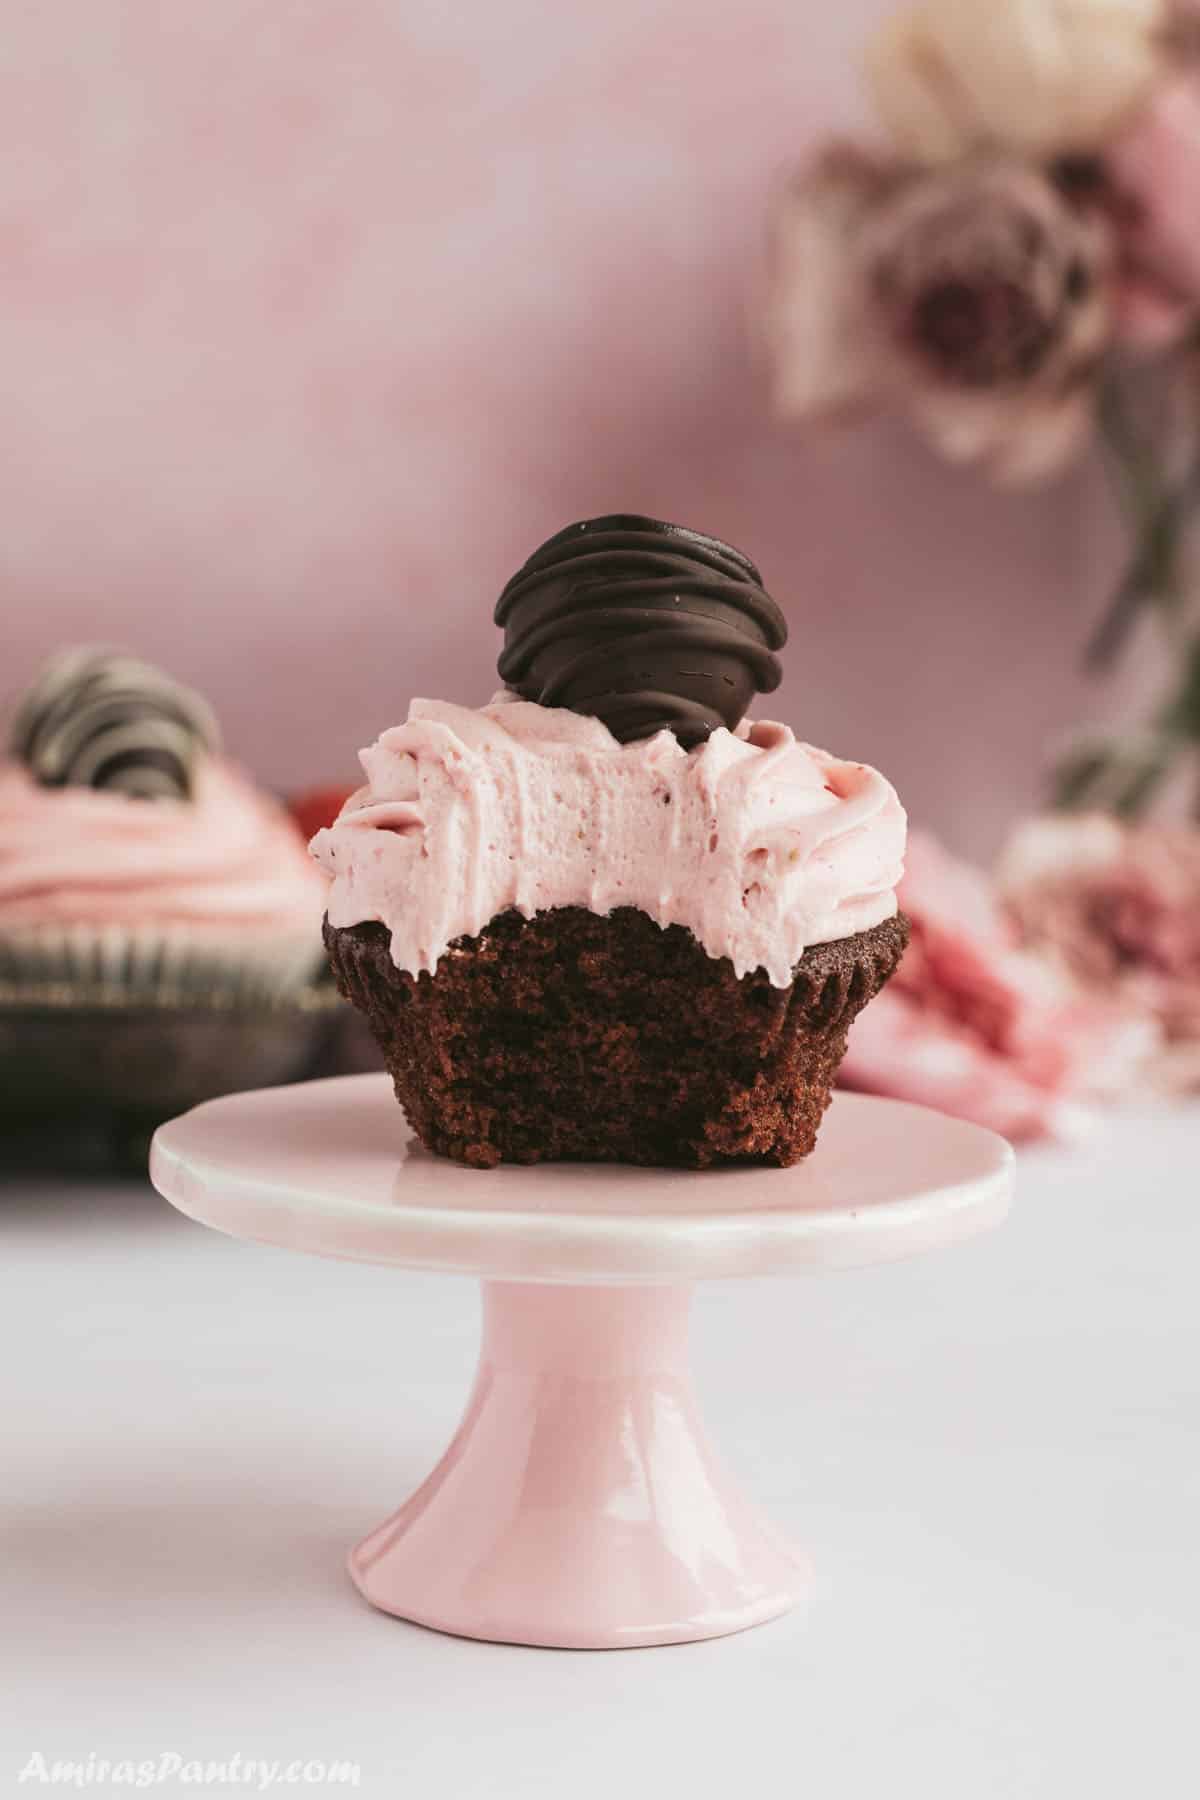 Chocolate cupcake put on a pink stand with a bite taken from it.